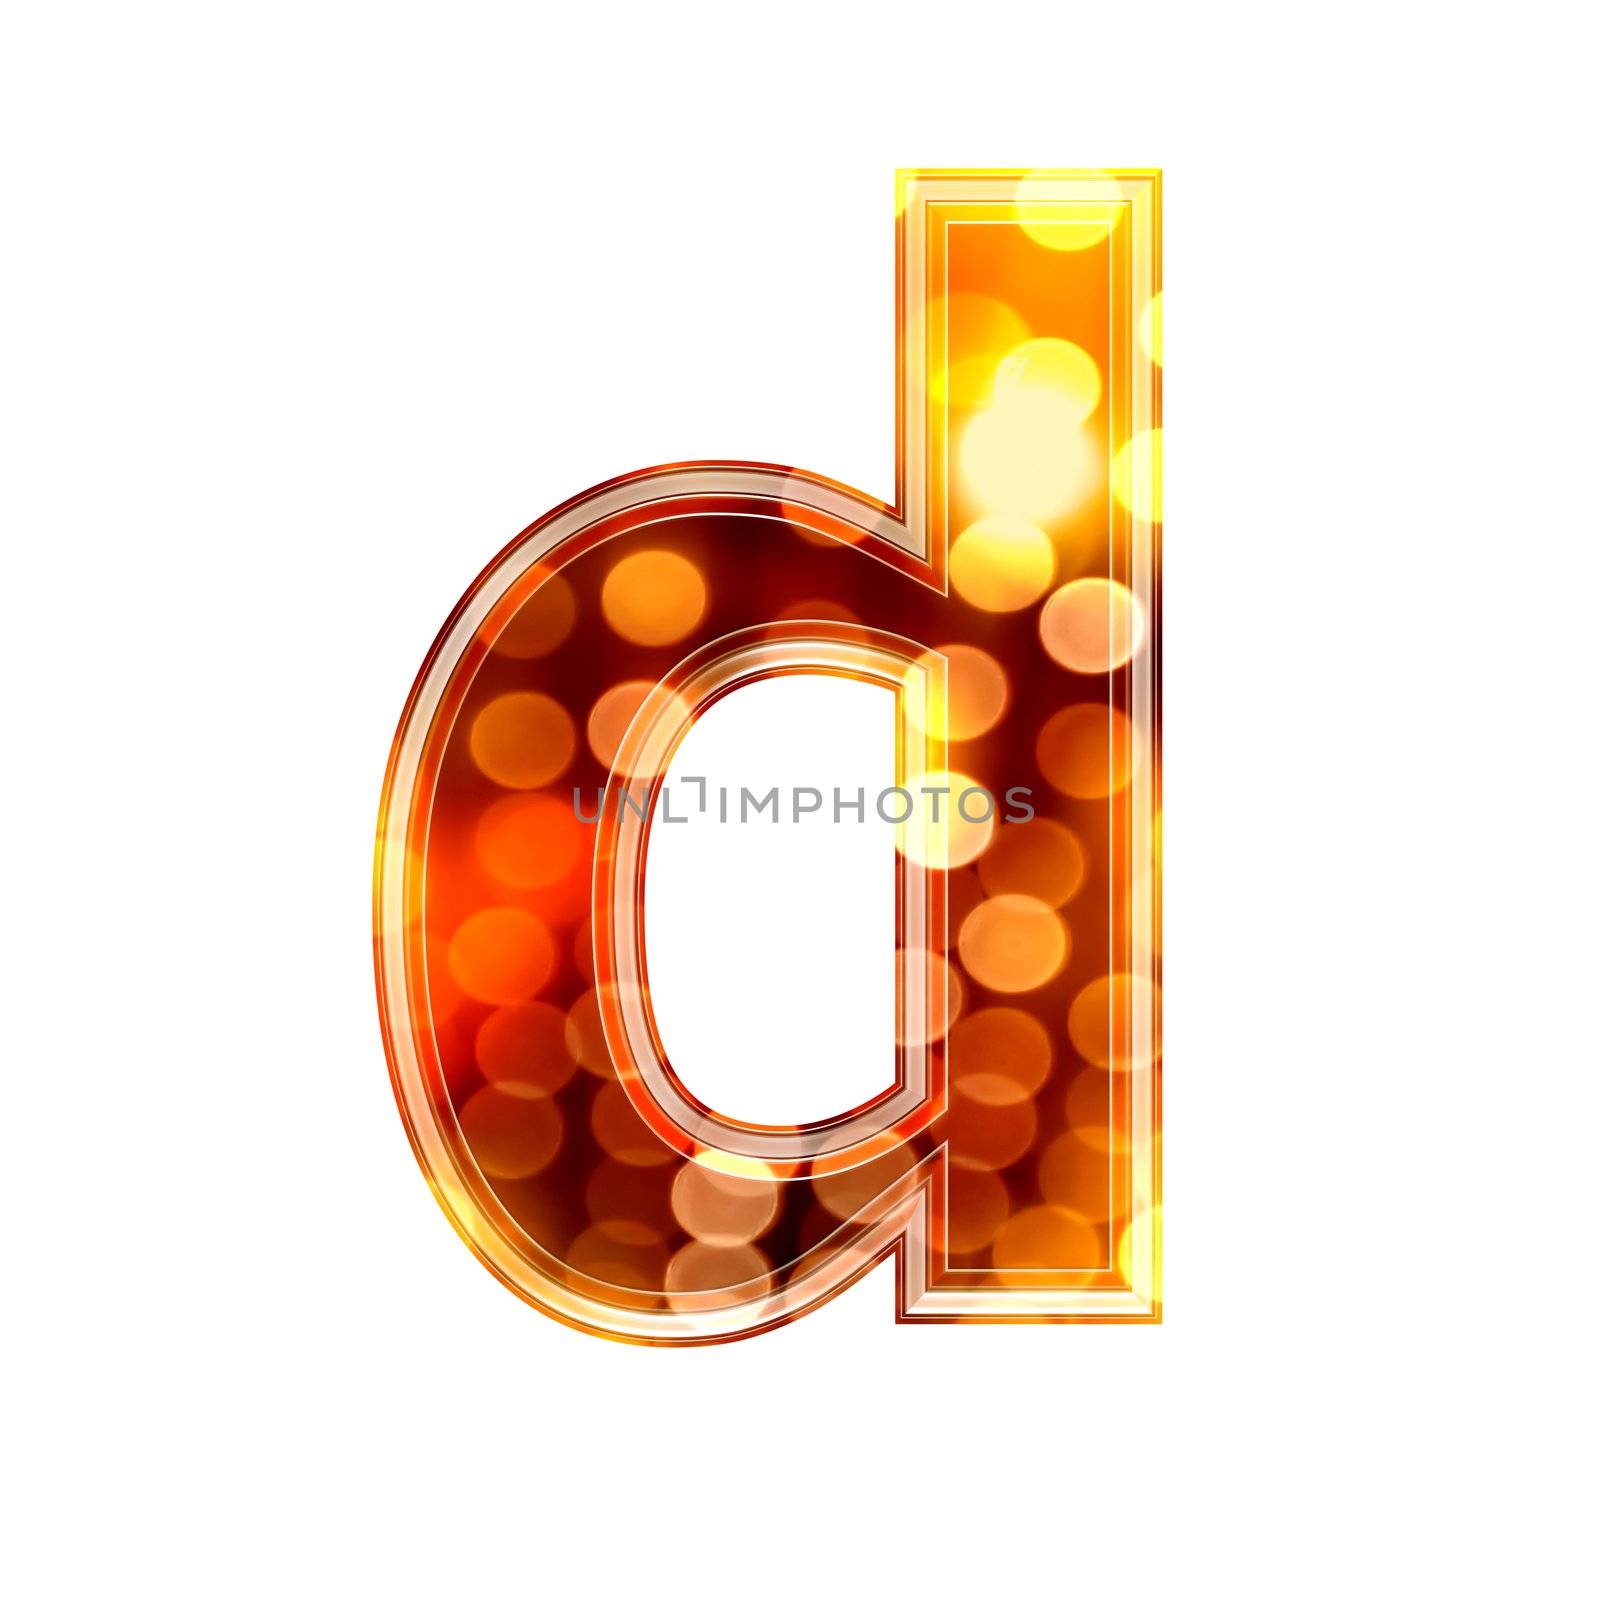 3d letter with glowing lights texture - d by chrisroll